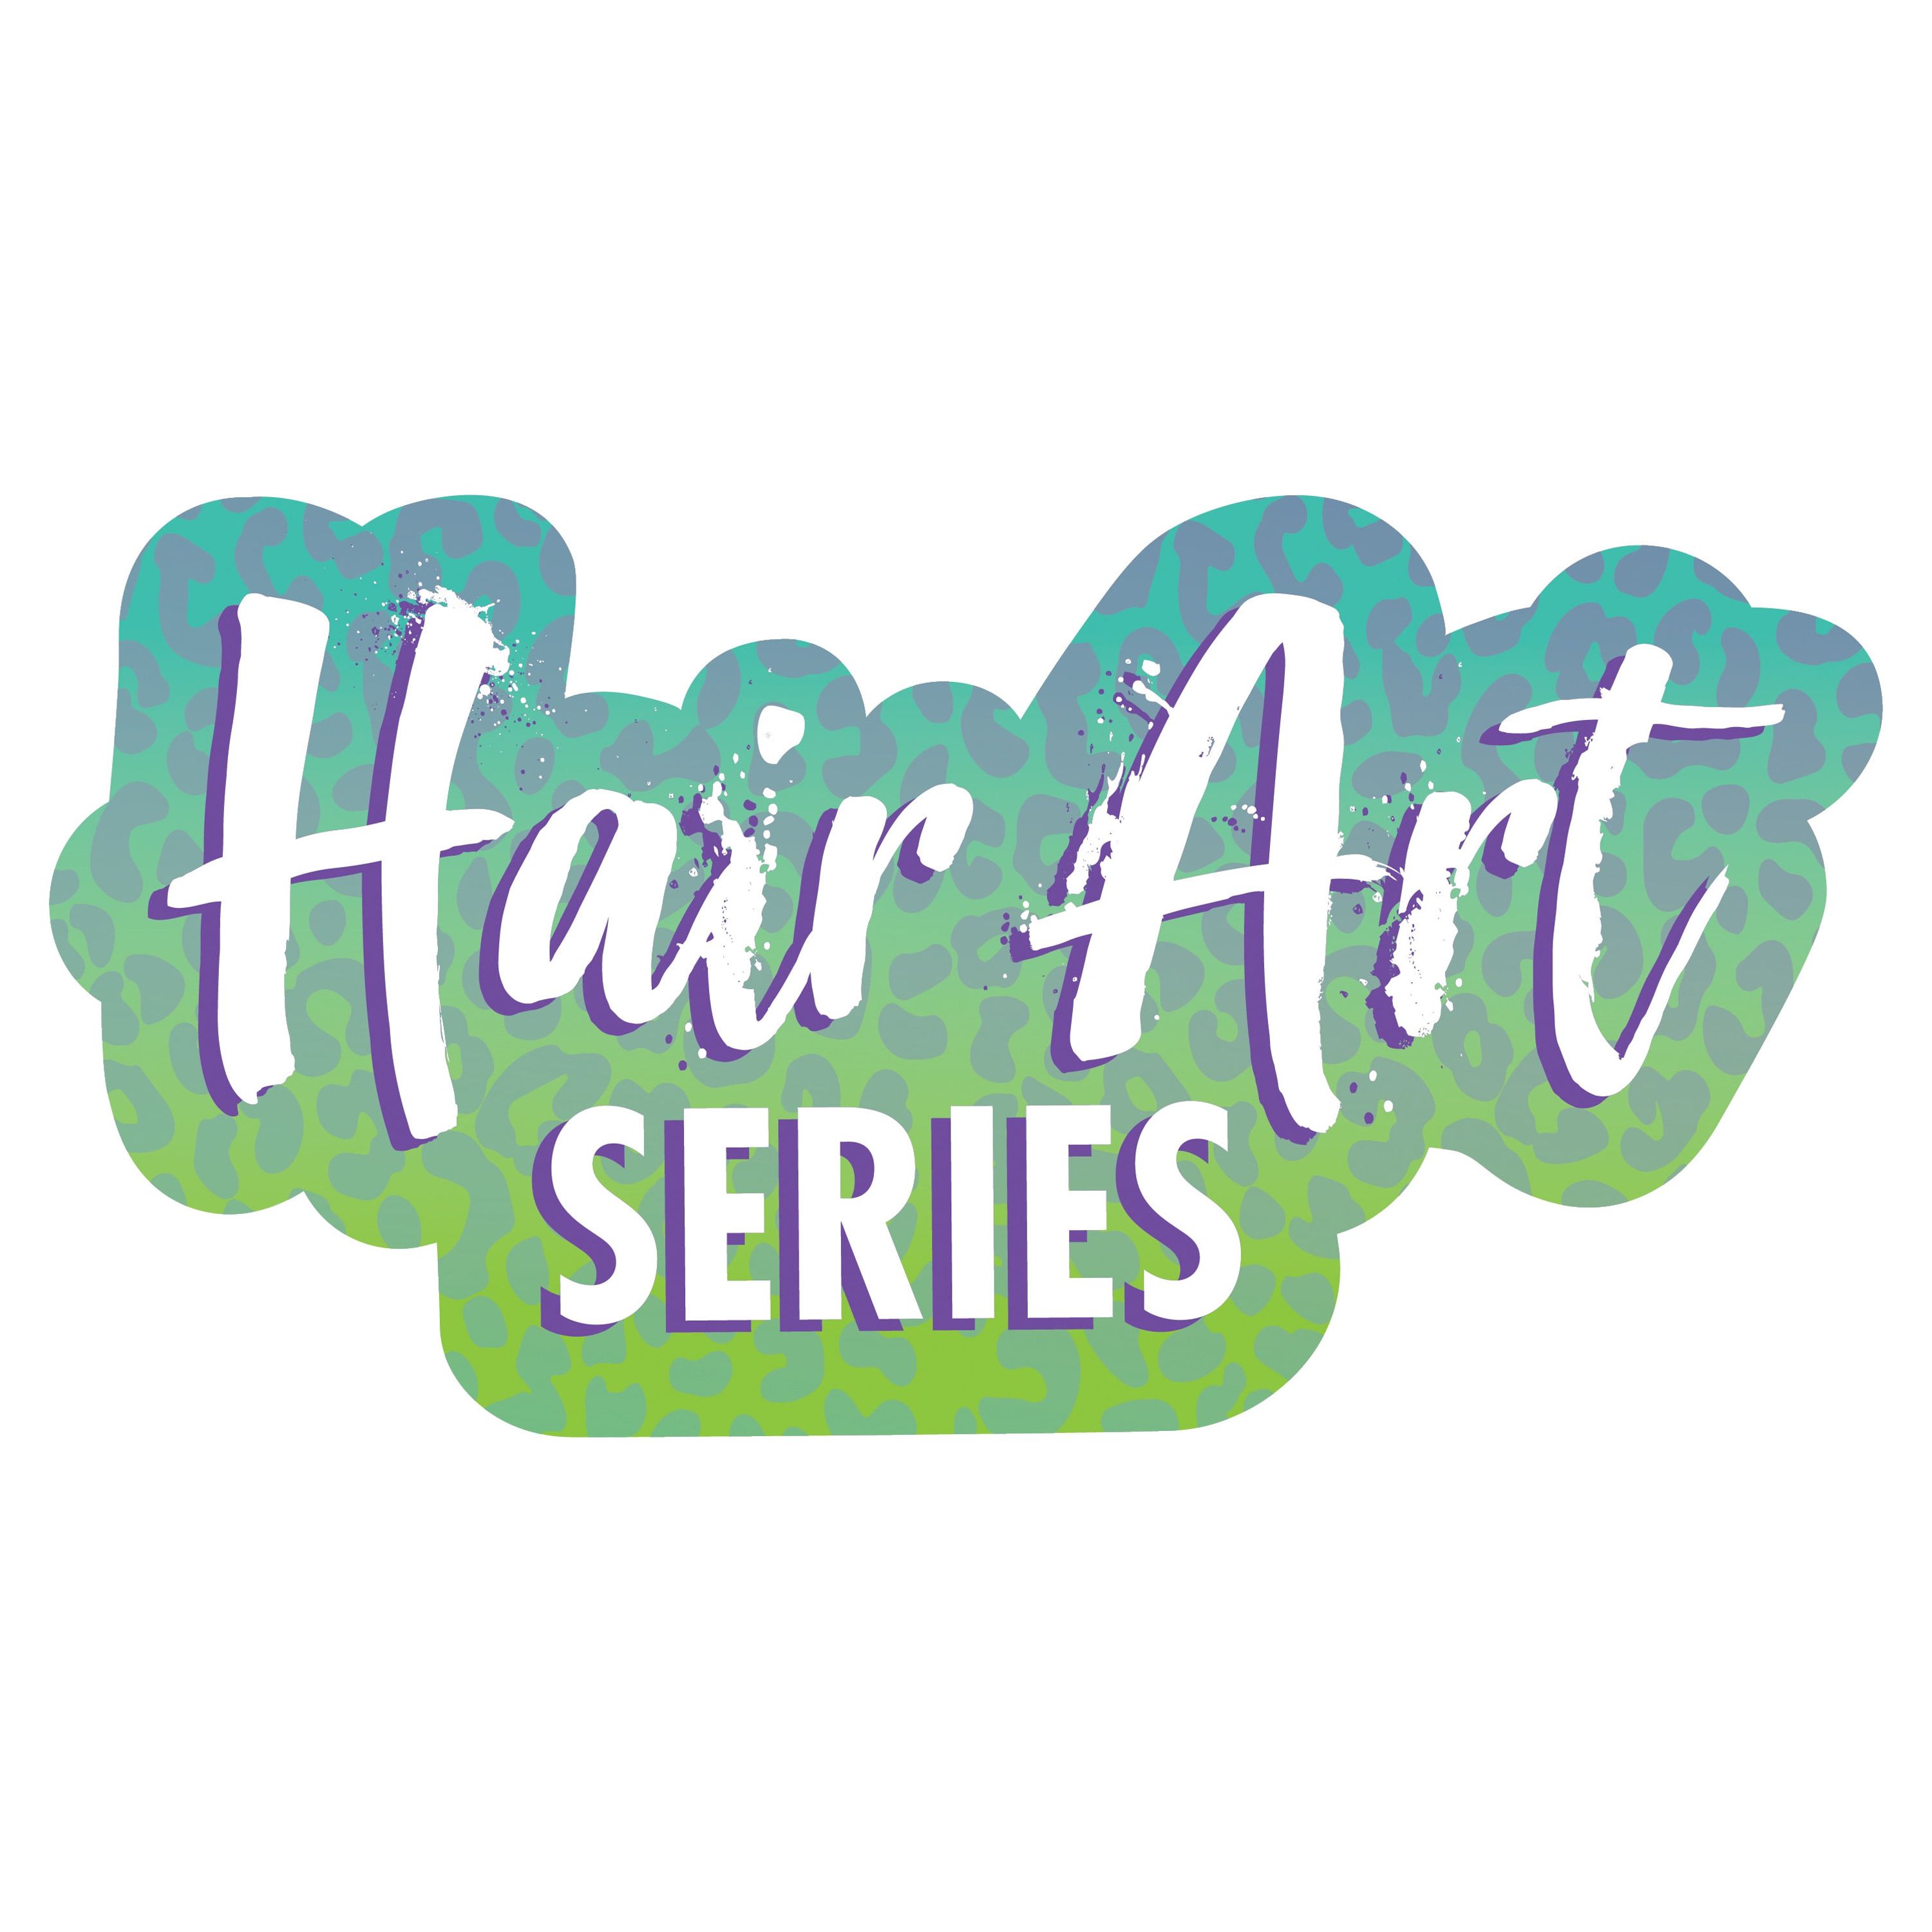 Hairdorables Collectible Doll Hair Art Series 5, styles and case colors may vary, each sold separately,  Kids Toys for Ages 3 Up, Gifts and Presents - image 4 of 8